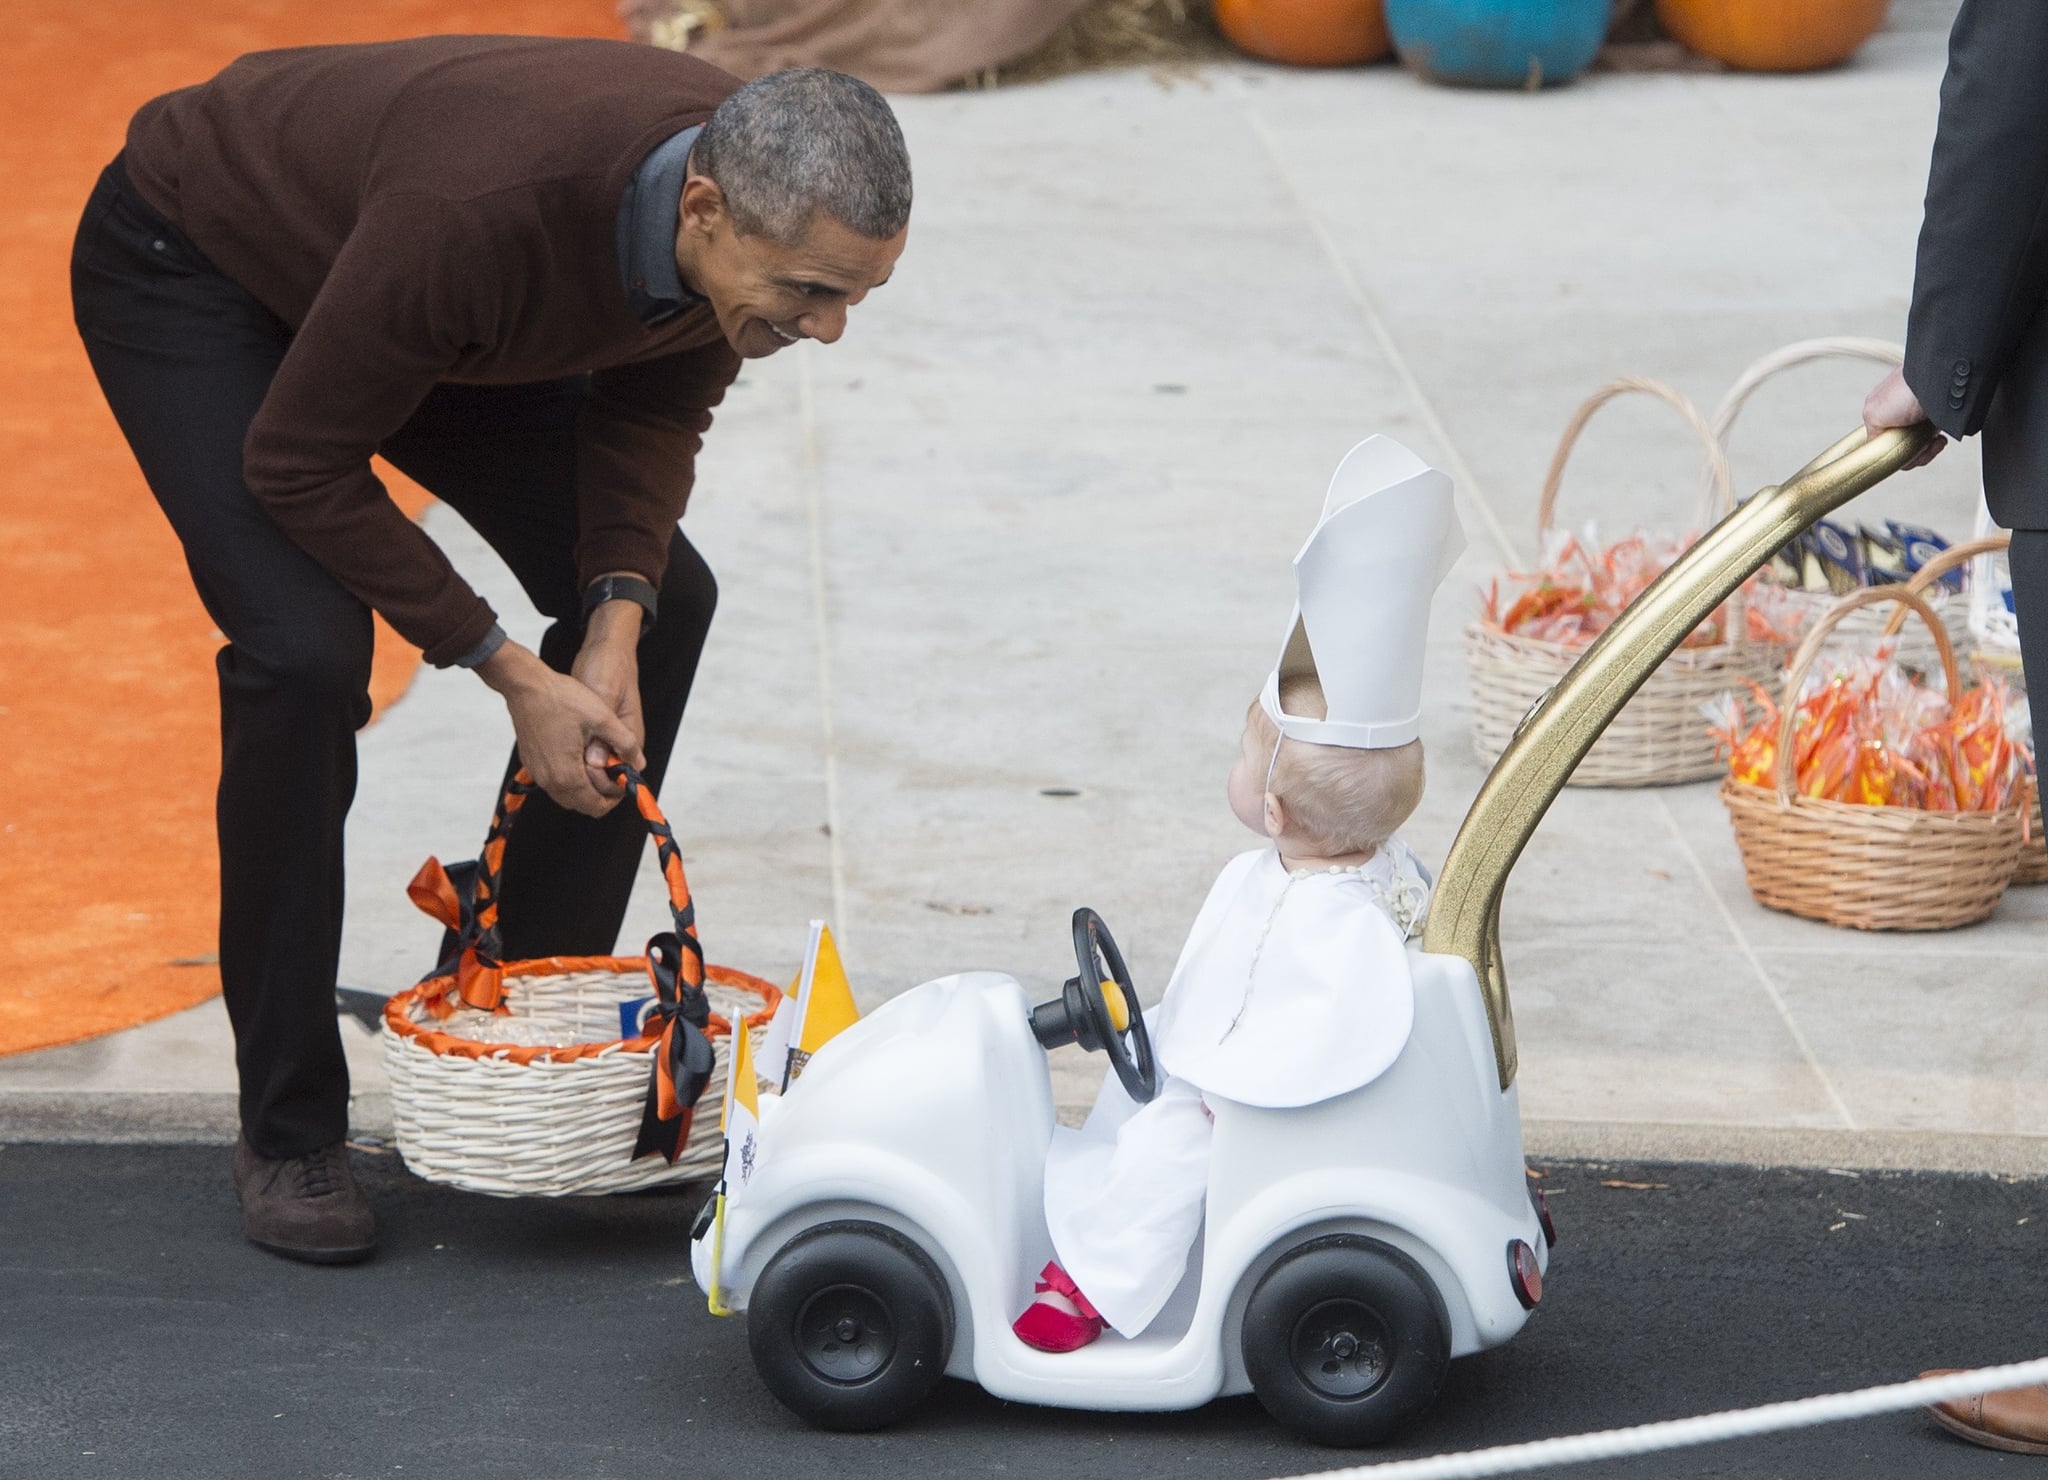 OBAMAS AND CHILD IN POPE HALLOWEEN COSTUME 8x10 SILVER HALIDE PHOTO PRINT 